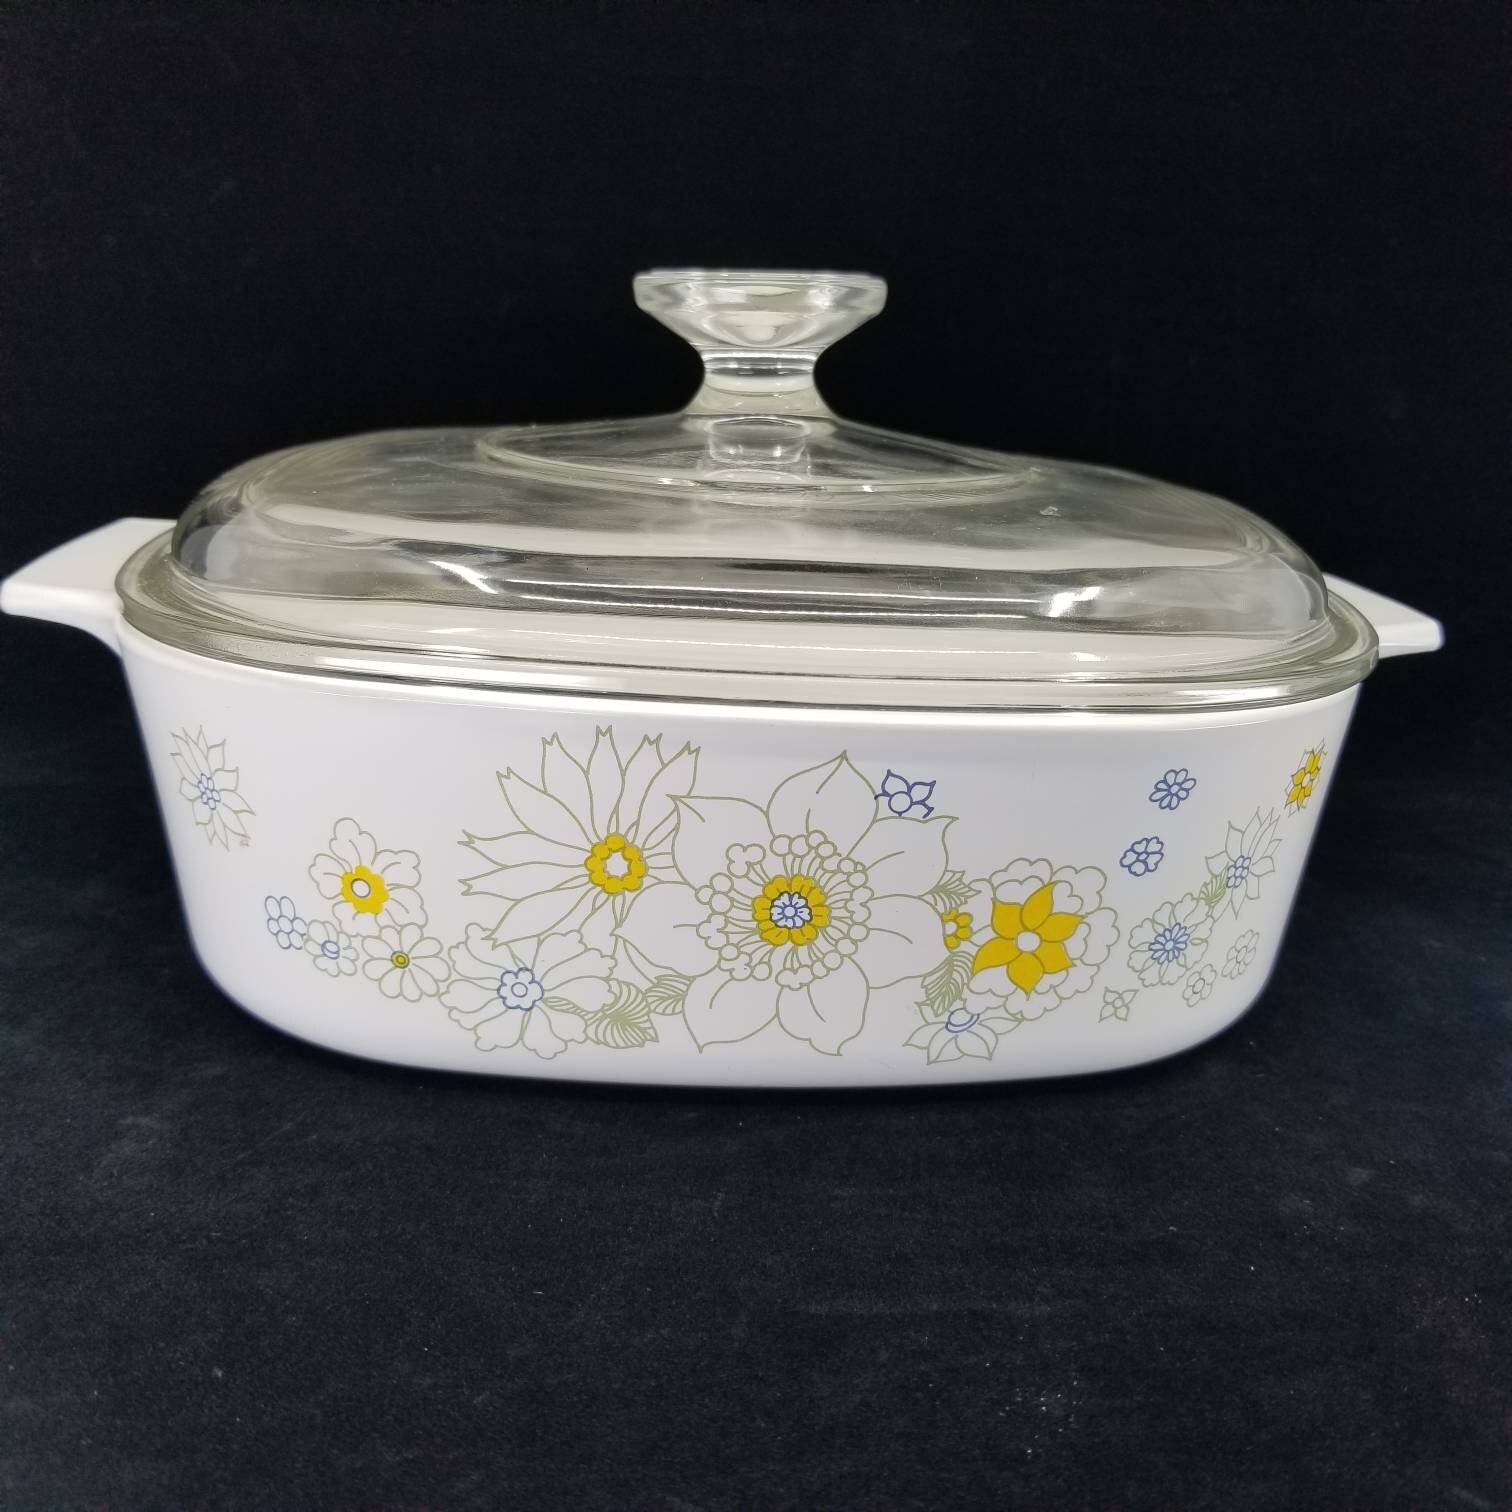 CORNING WARE Floral Bouquet 2 Quart Covered Saucepan A-2-B | Etsy